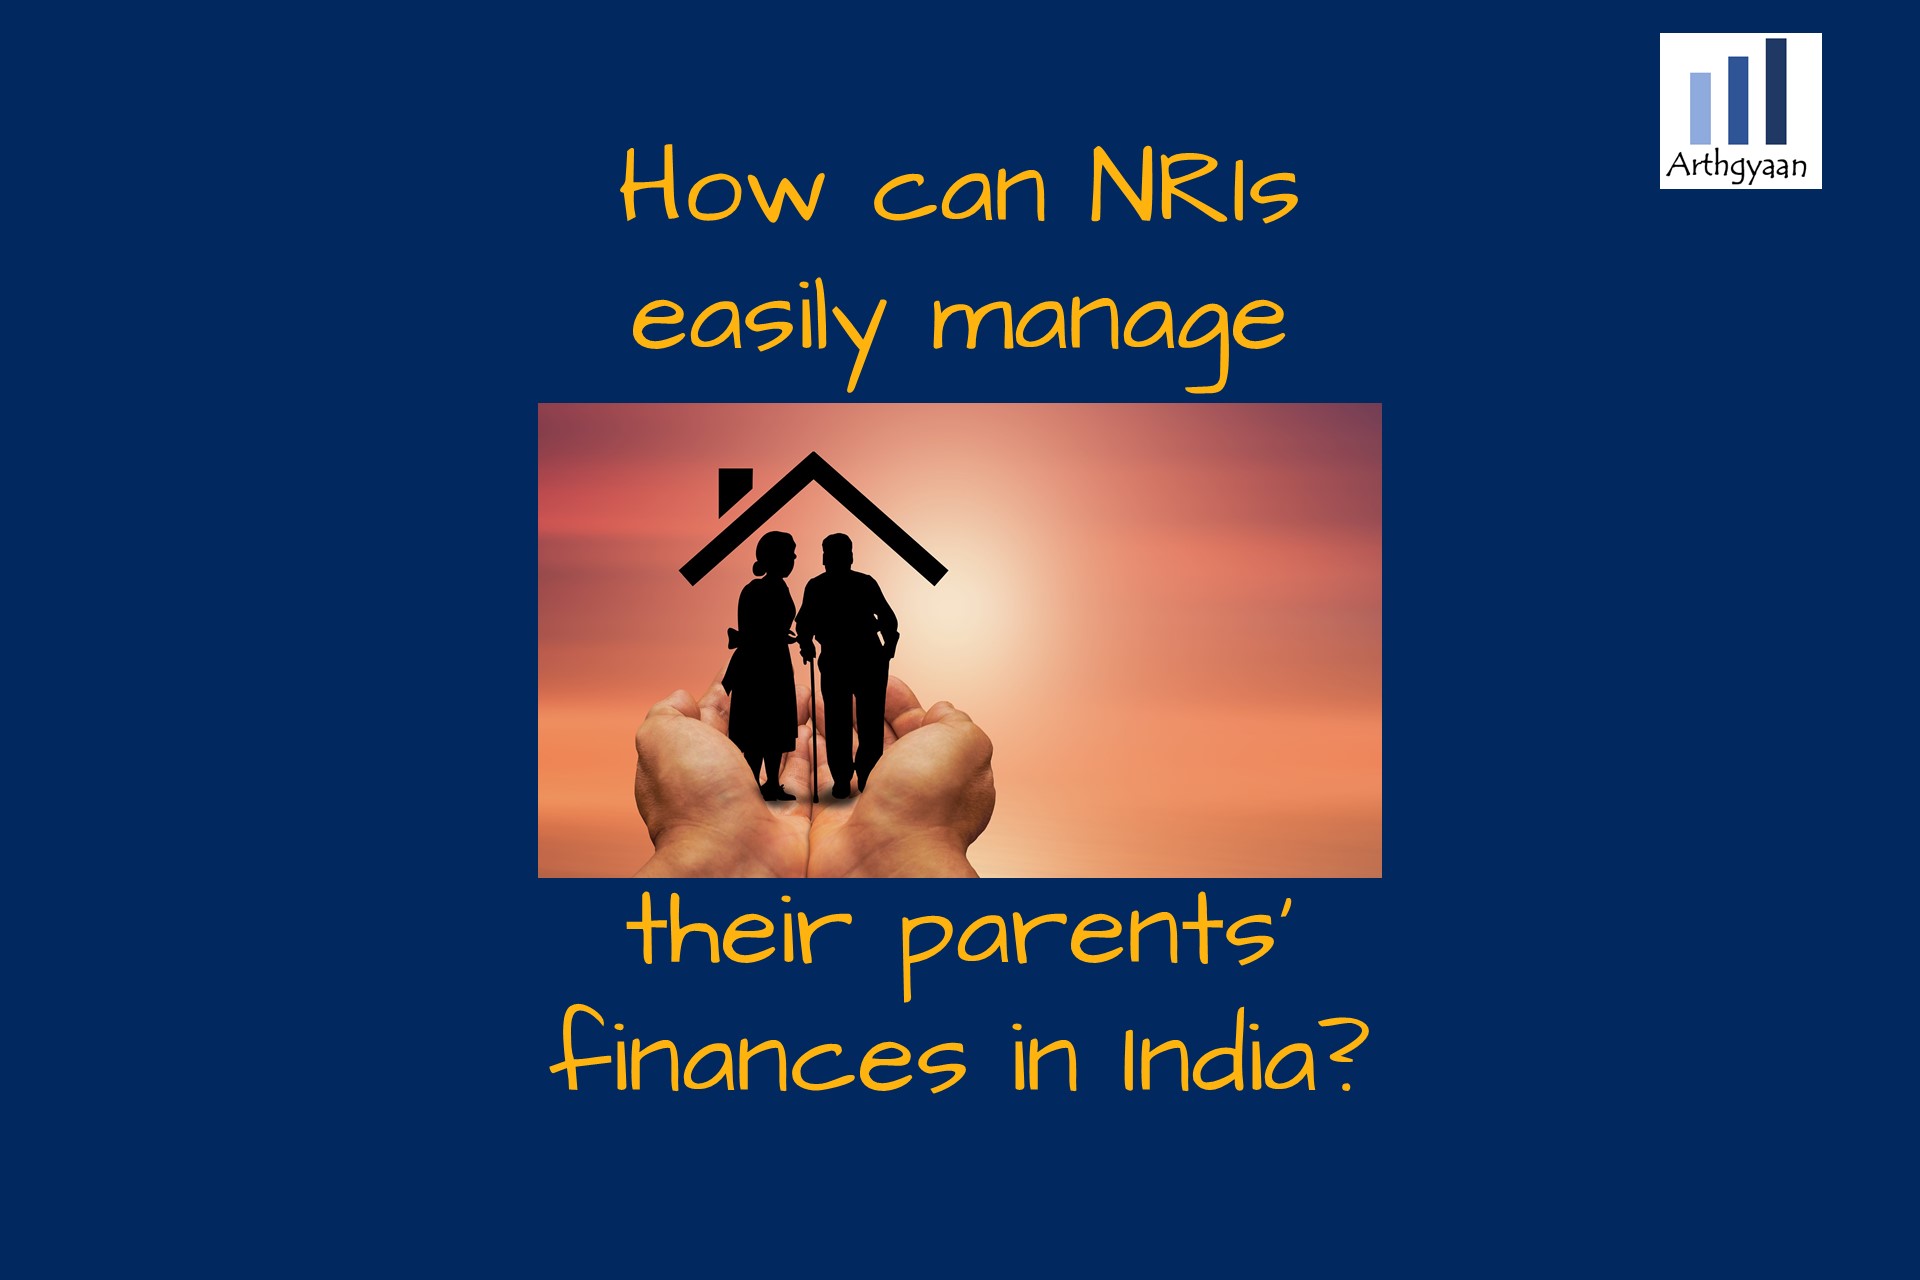 How can NRIs easily manage their parents’ finances in India?